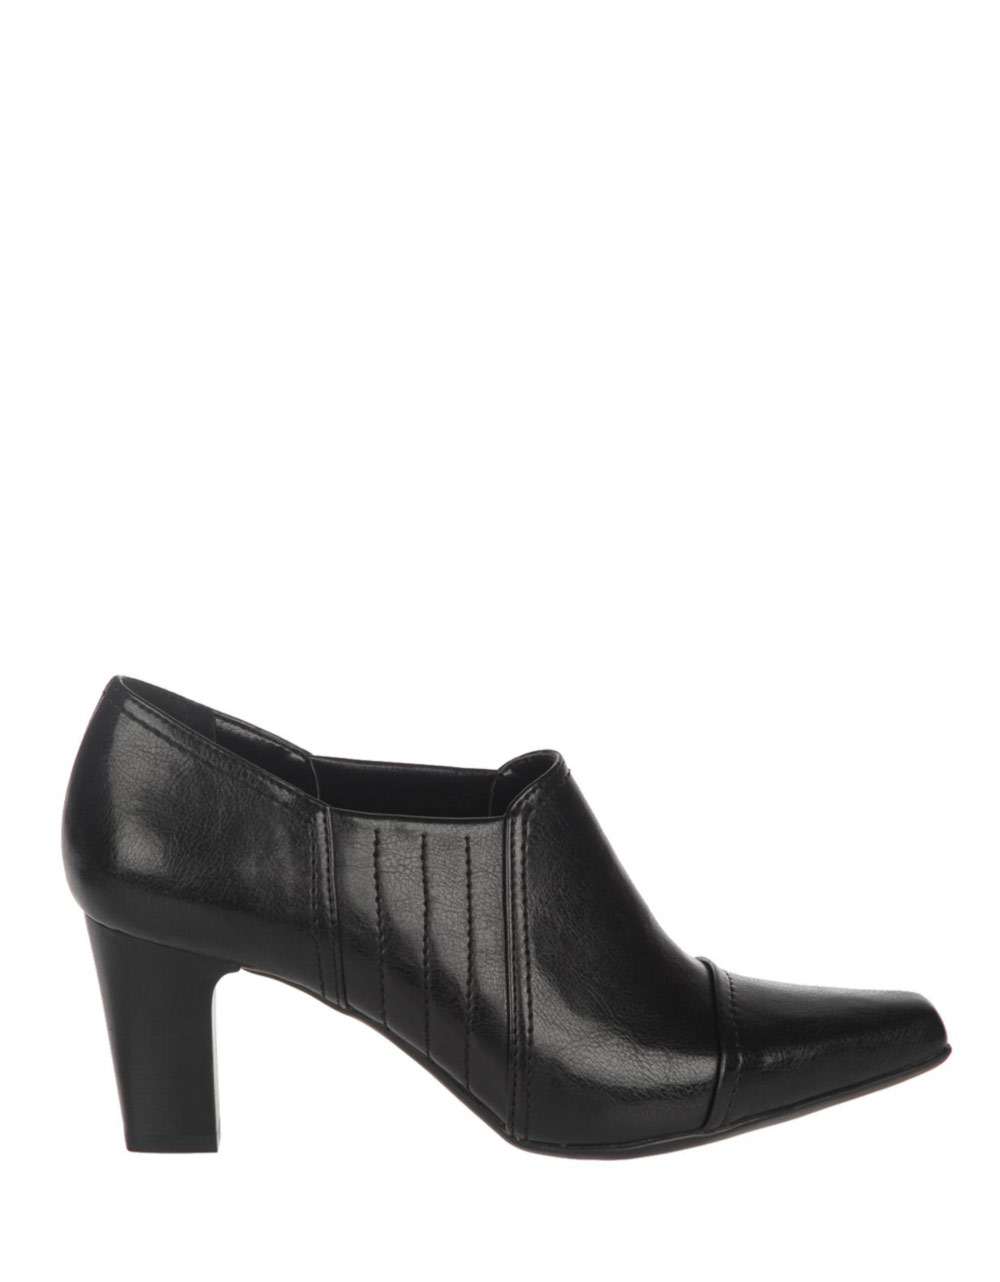 Franco Sarto Tanya Leather Highheel Ankle Boots in Black (black leather ...